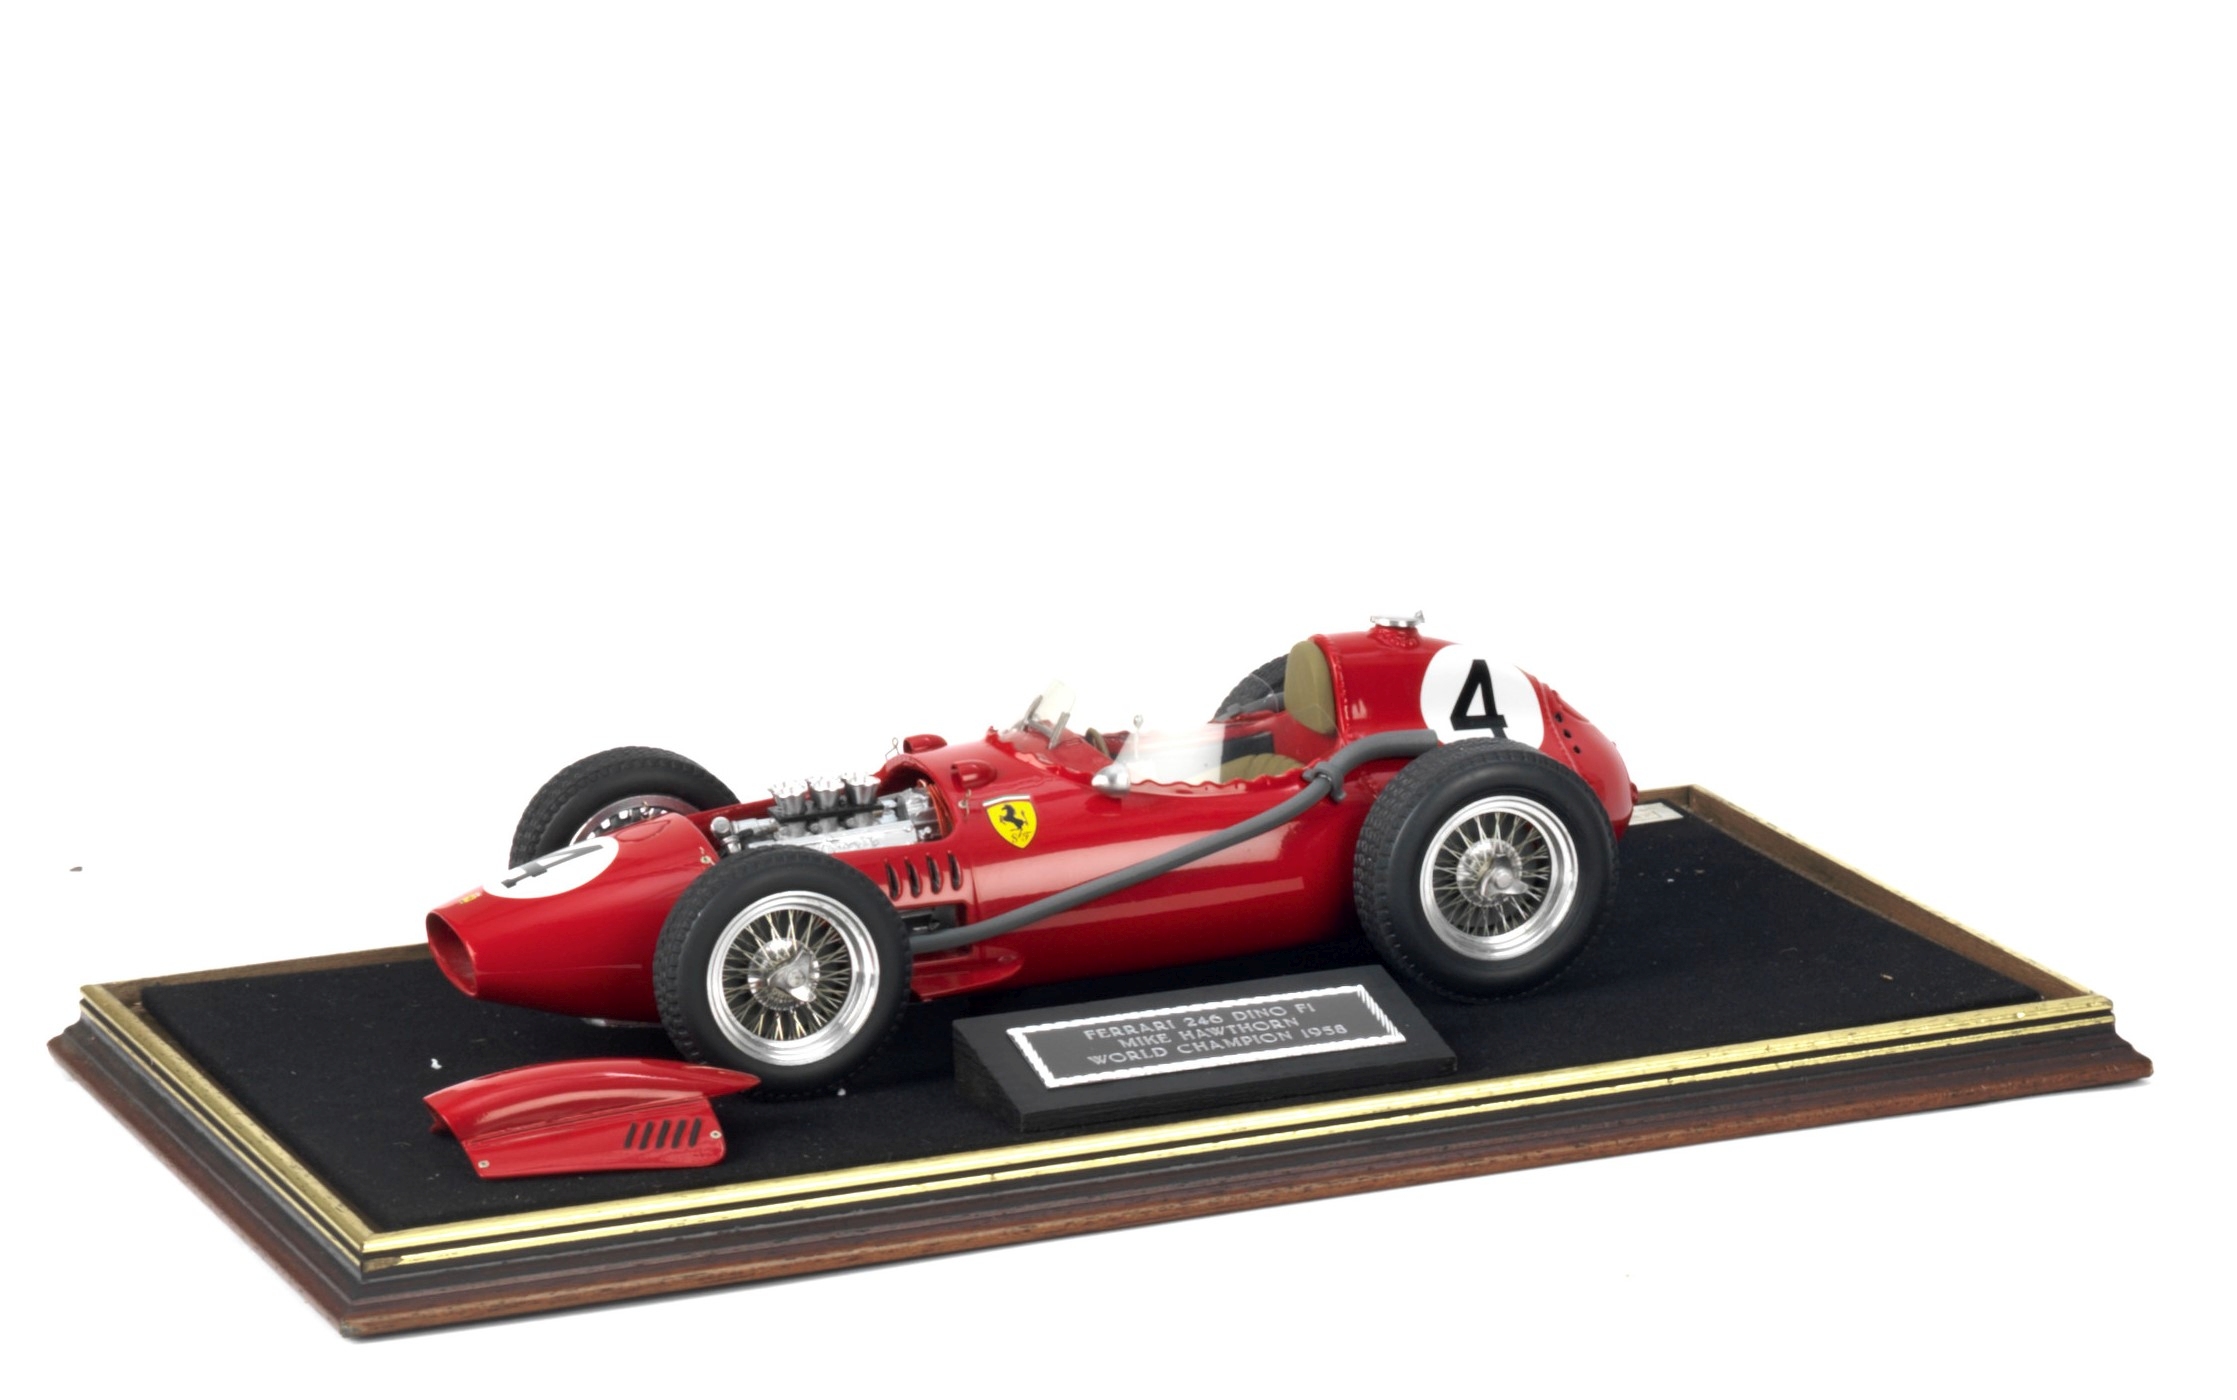 An MG Models limited edition scale model of Mike Hawthorn's 1958 Driver World Championship Ferrar...